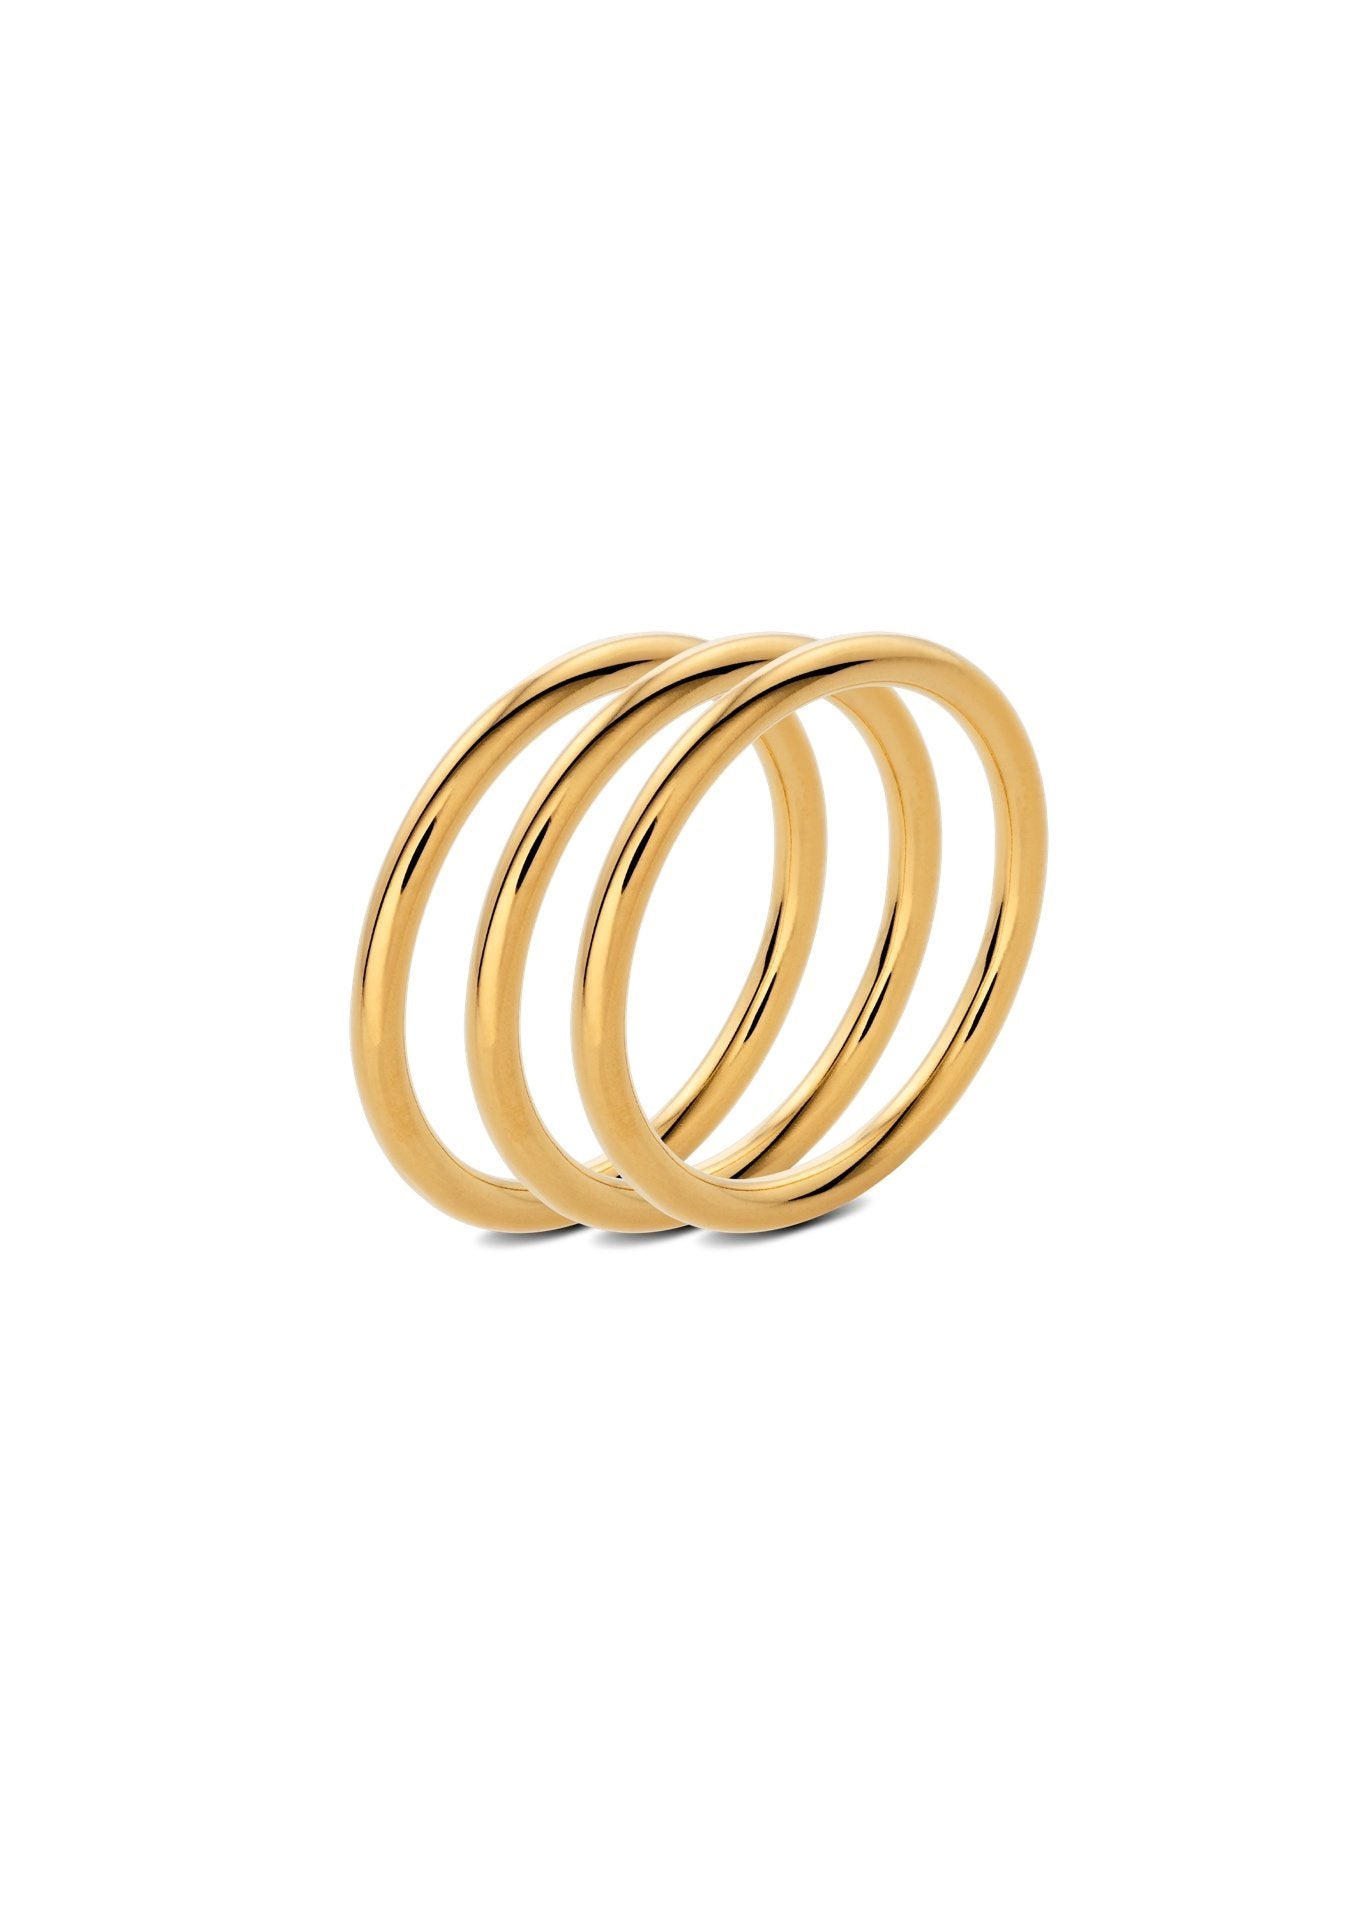 NO MORE accessories Plain Rings Stack in Gold plated Sterling Silber